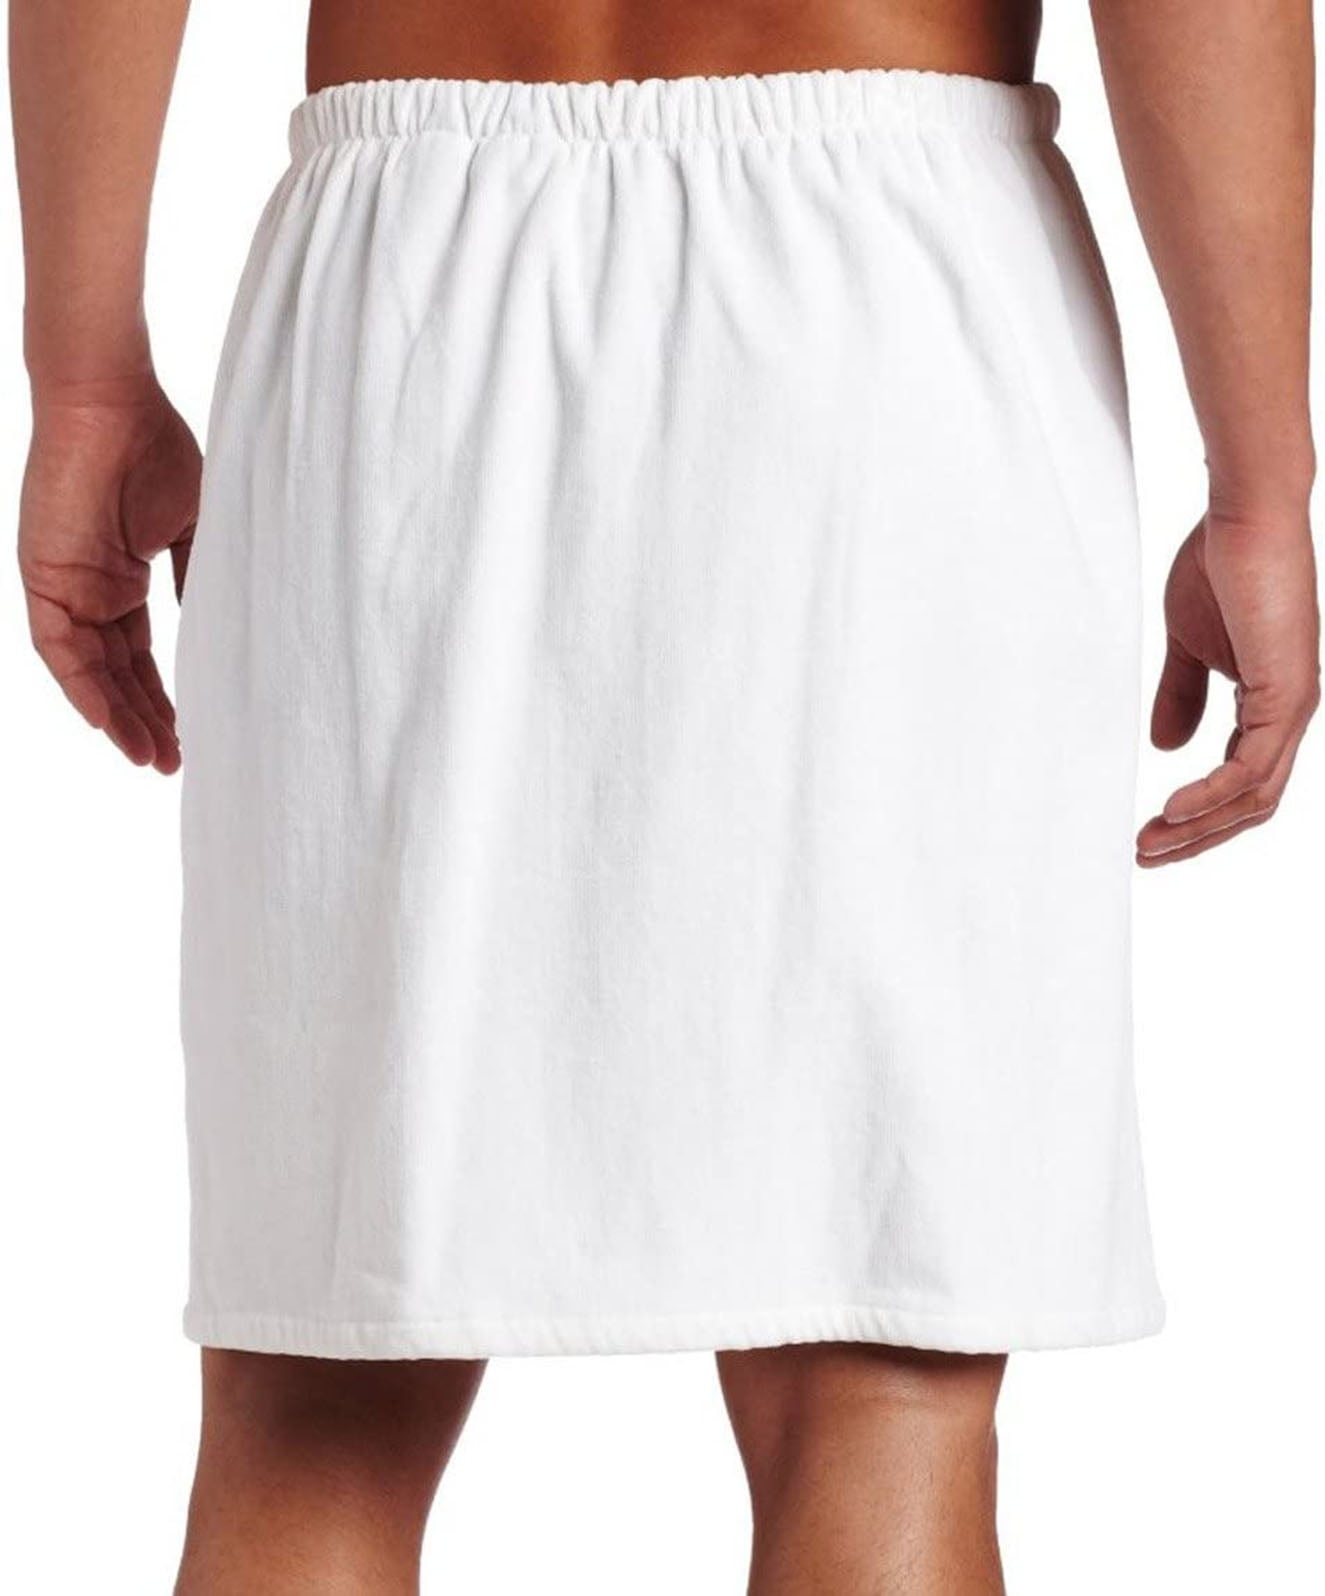 The Company Store Company Cotton Men's Large/Extra Large White Bath Wrap  RL10-LXL-WHITE - The Home Depot